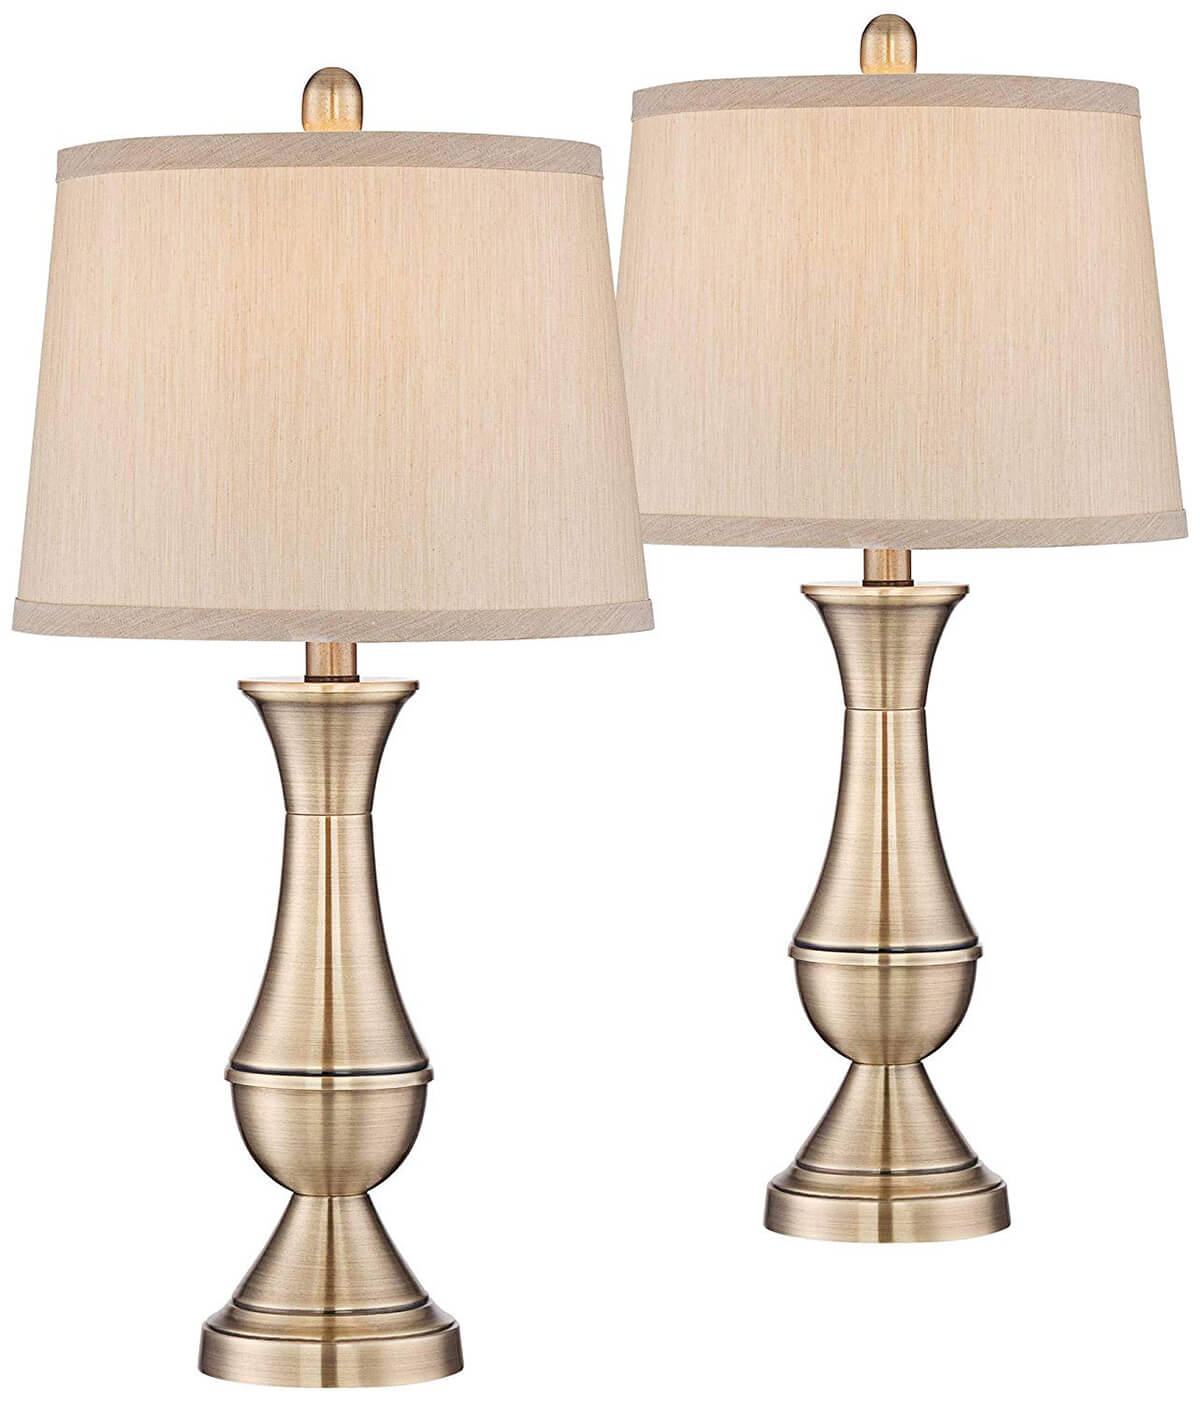 25 Best Bedside Table Lamps To Light Up, Set Of Two Crystal Table Lamps